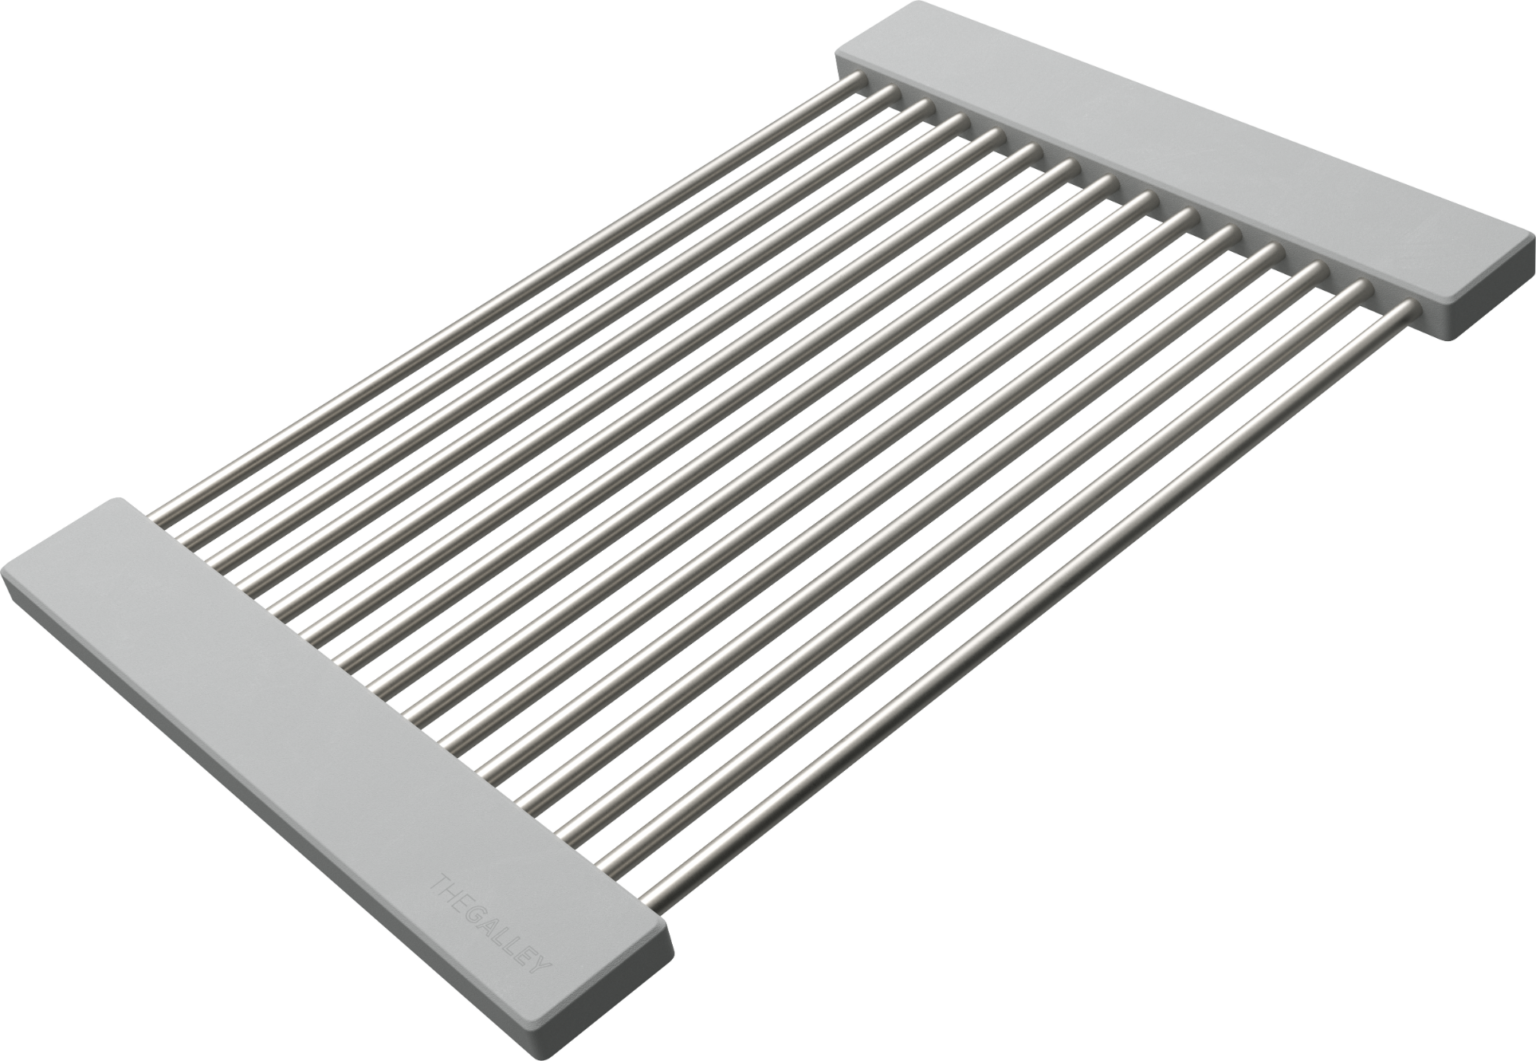 The Galley Upper Tier Drying Rack 12-1/4" x 18"